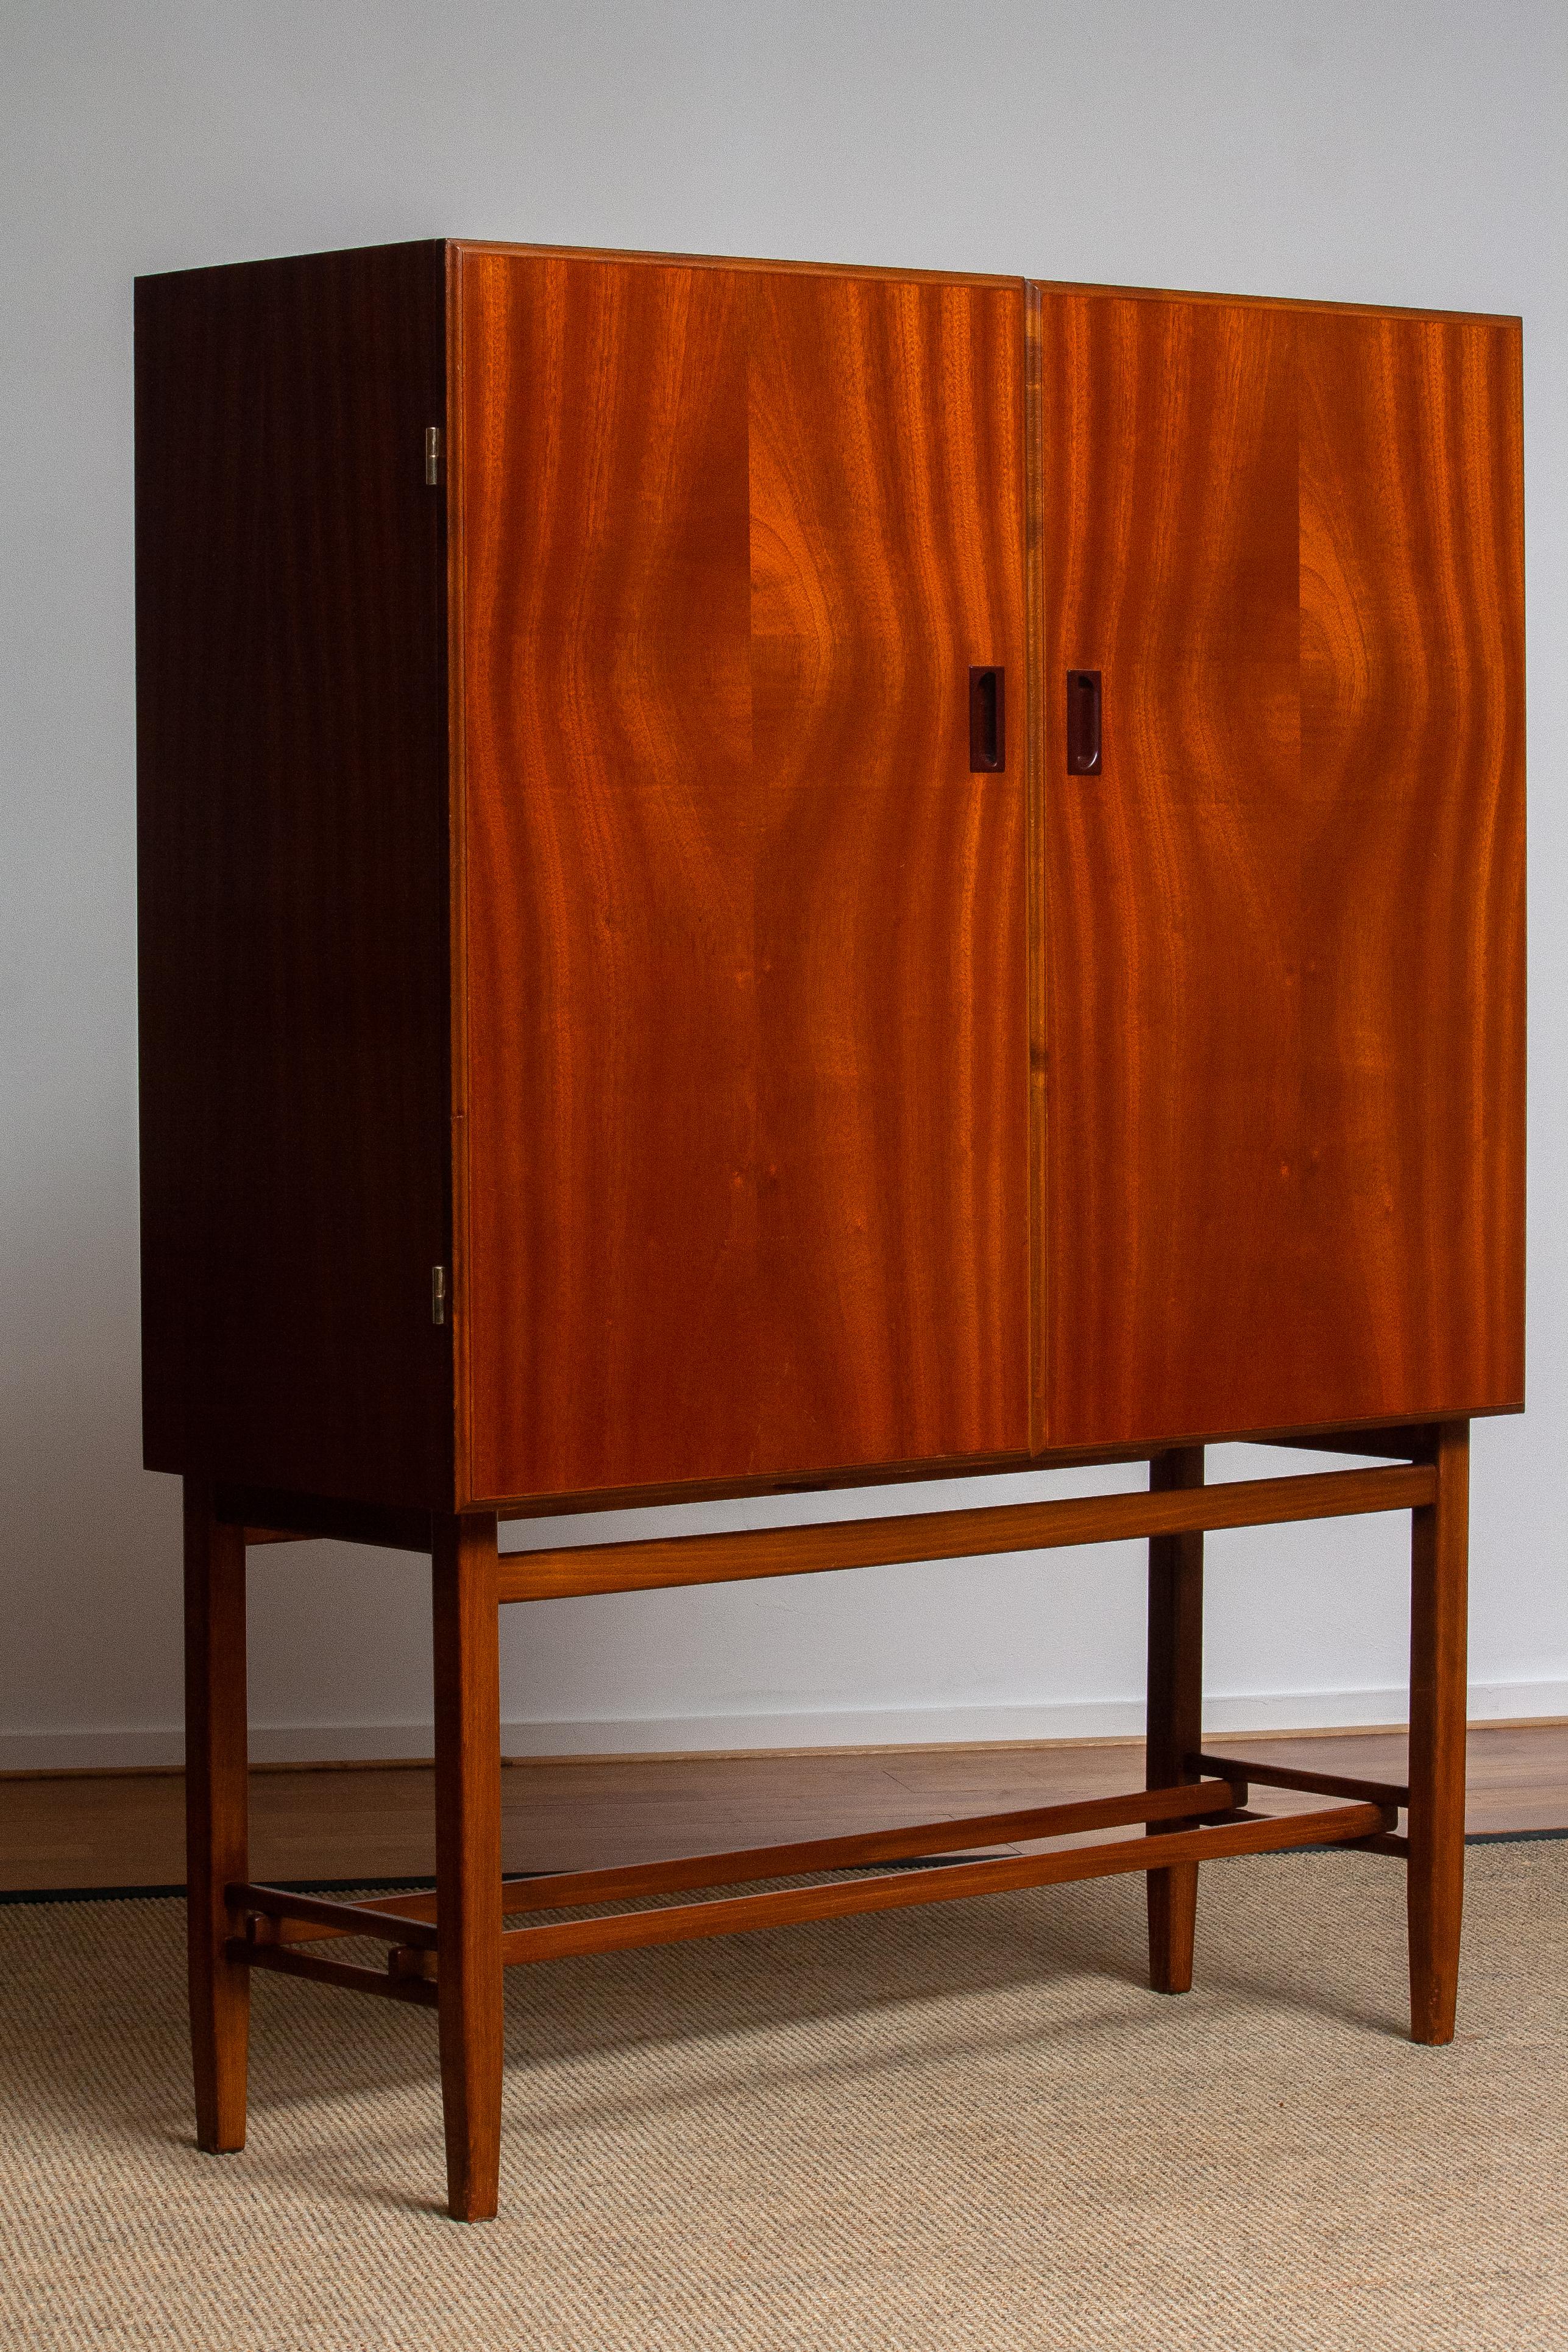 Brass 1950s, Slim Midcentury Mahogany Dry Bar / Cabinet by Forenades Mobler, Sweden